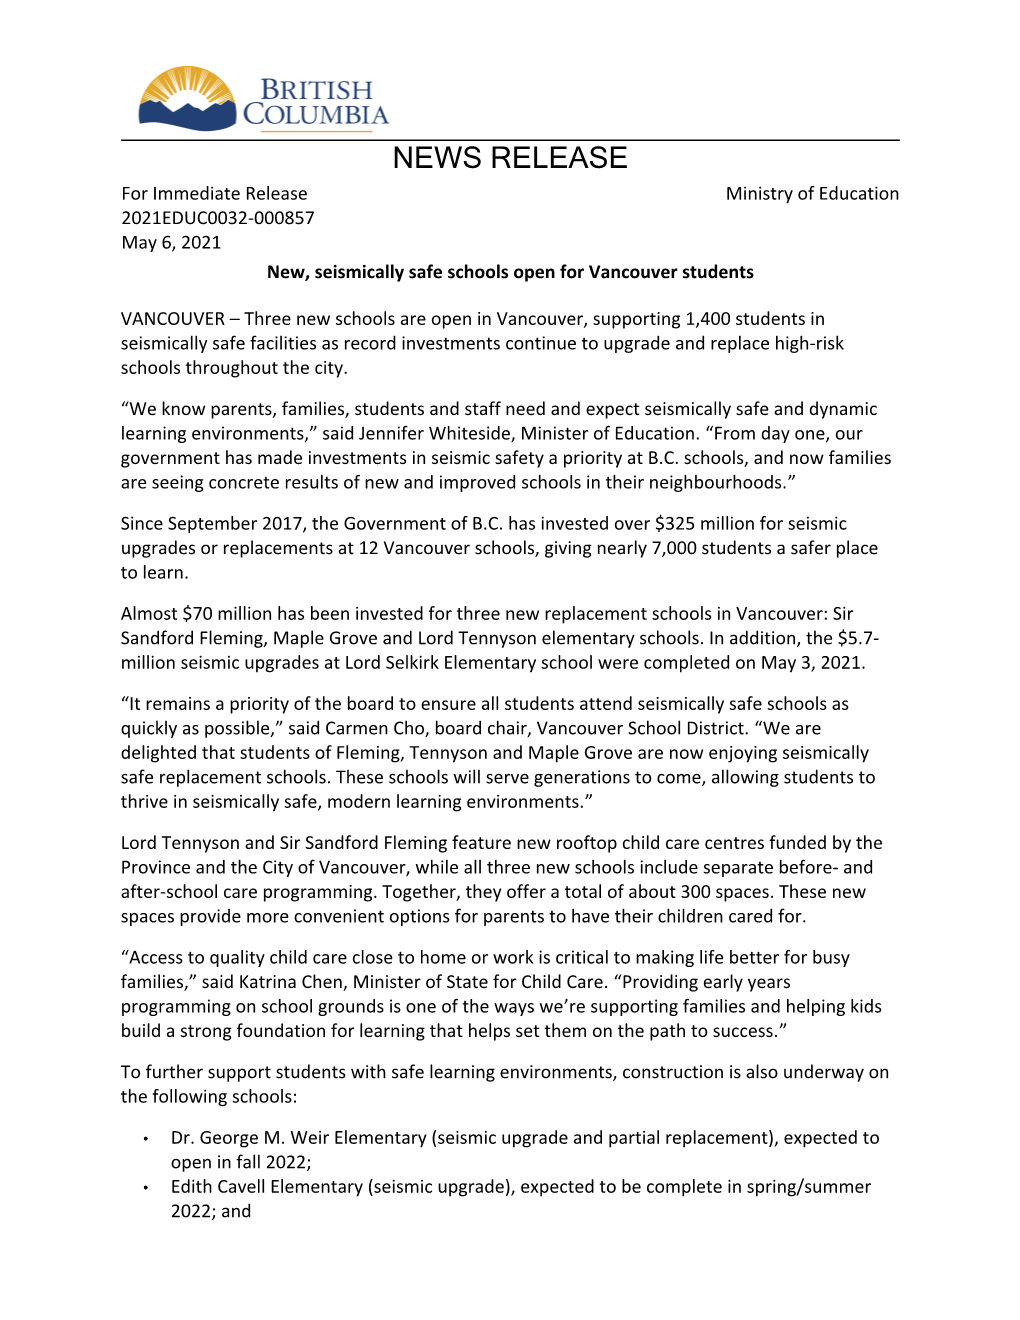 NEWS RELEASE for Immediate Release Ministry of Education 2021EDUC0032-000857 May 6, 2021 New, Seismically Safe Schools Open for Vancouver Students